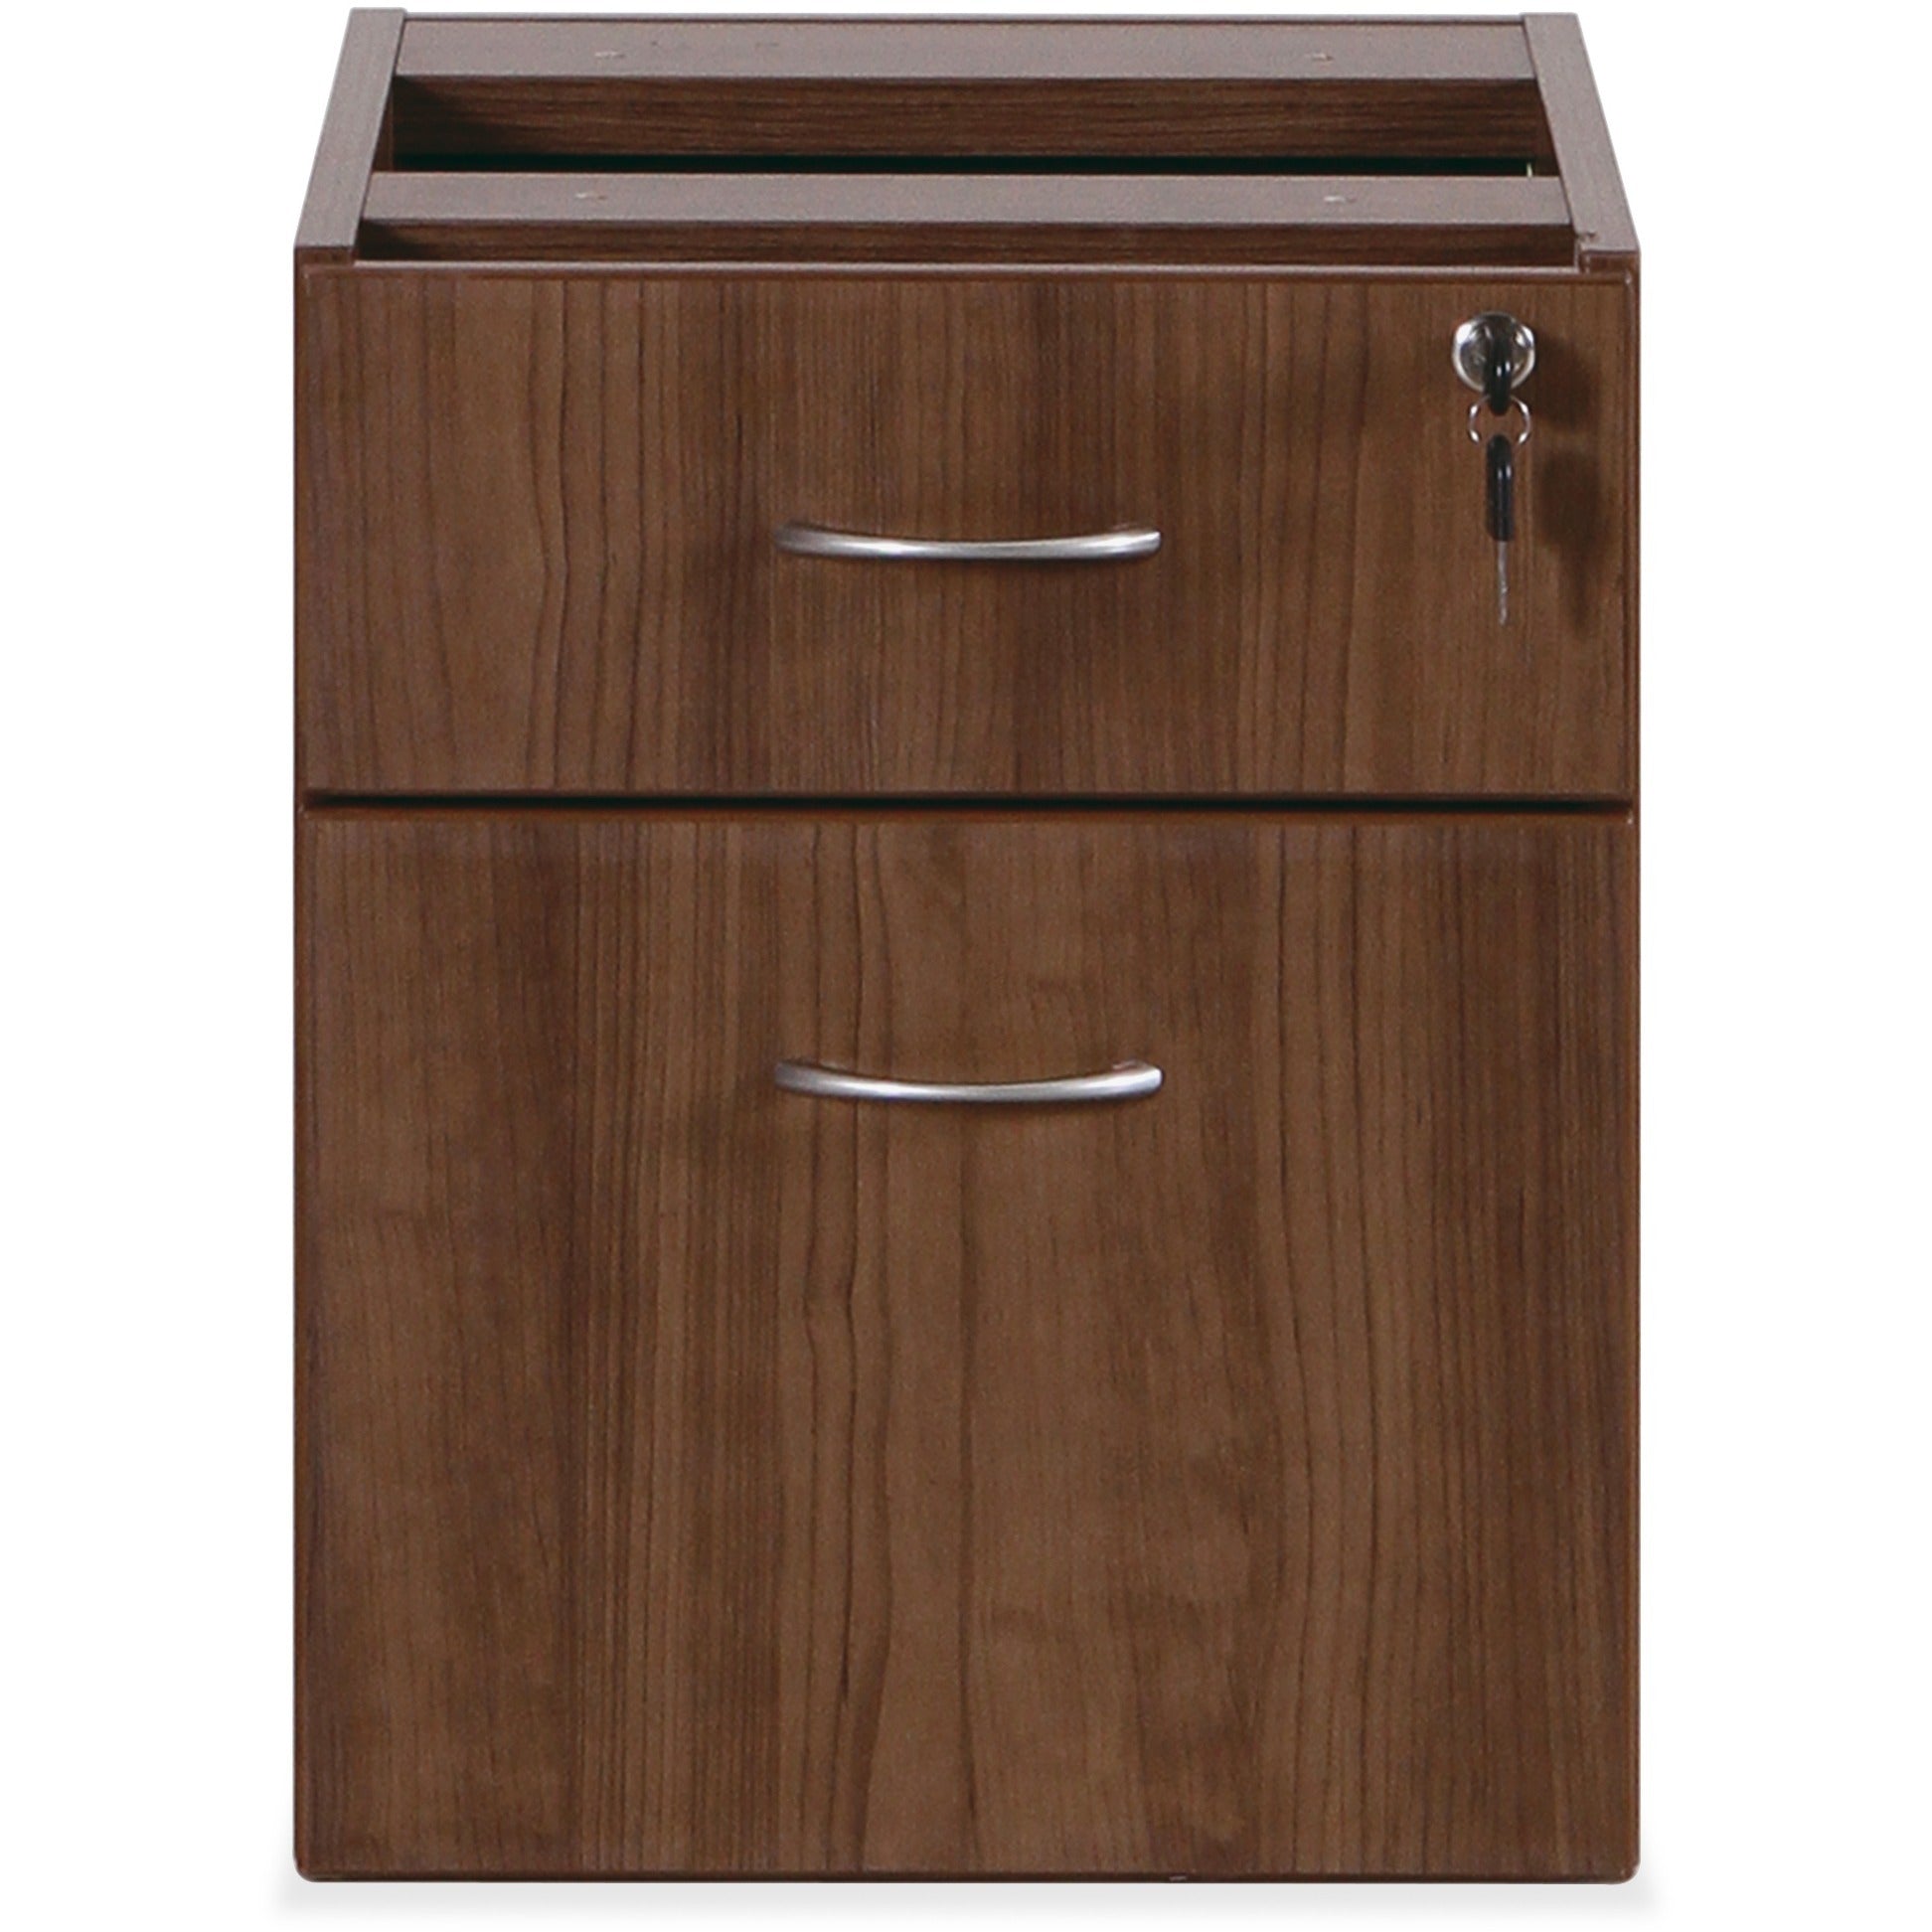 Lorell Essentials Series Box/File Hanging File Cabinet - 15.5" x 21.9"18.9" - 2 x Box, File Drawer(s) - Finish: Walnut Laminate - Built-in Hangrail, Ball Bearing Slides, Lockable, Durable, Adjustable Feet - For Office - 